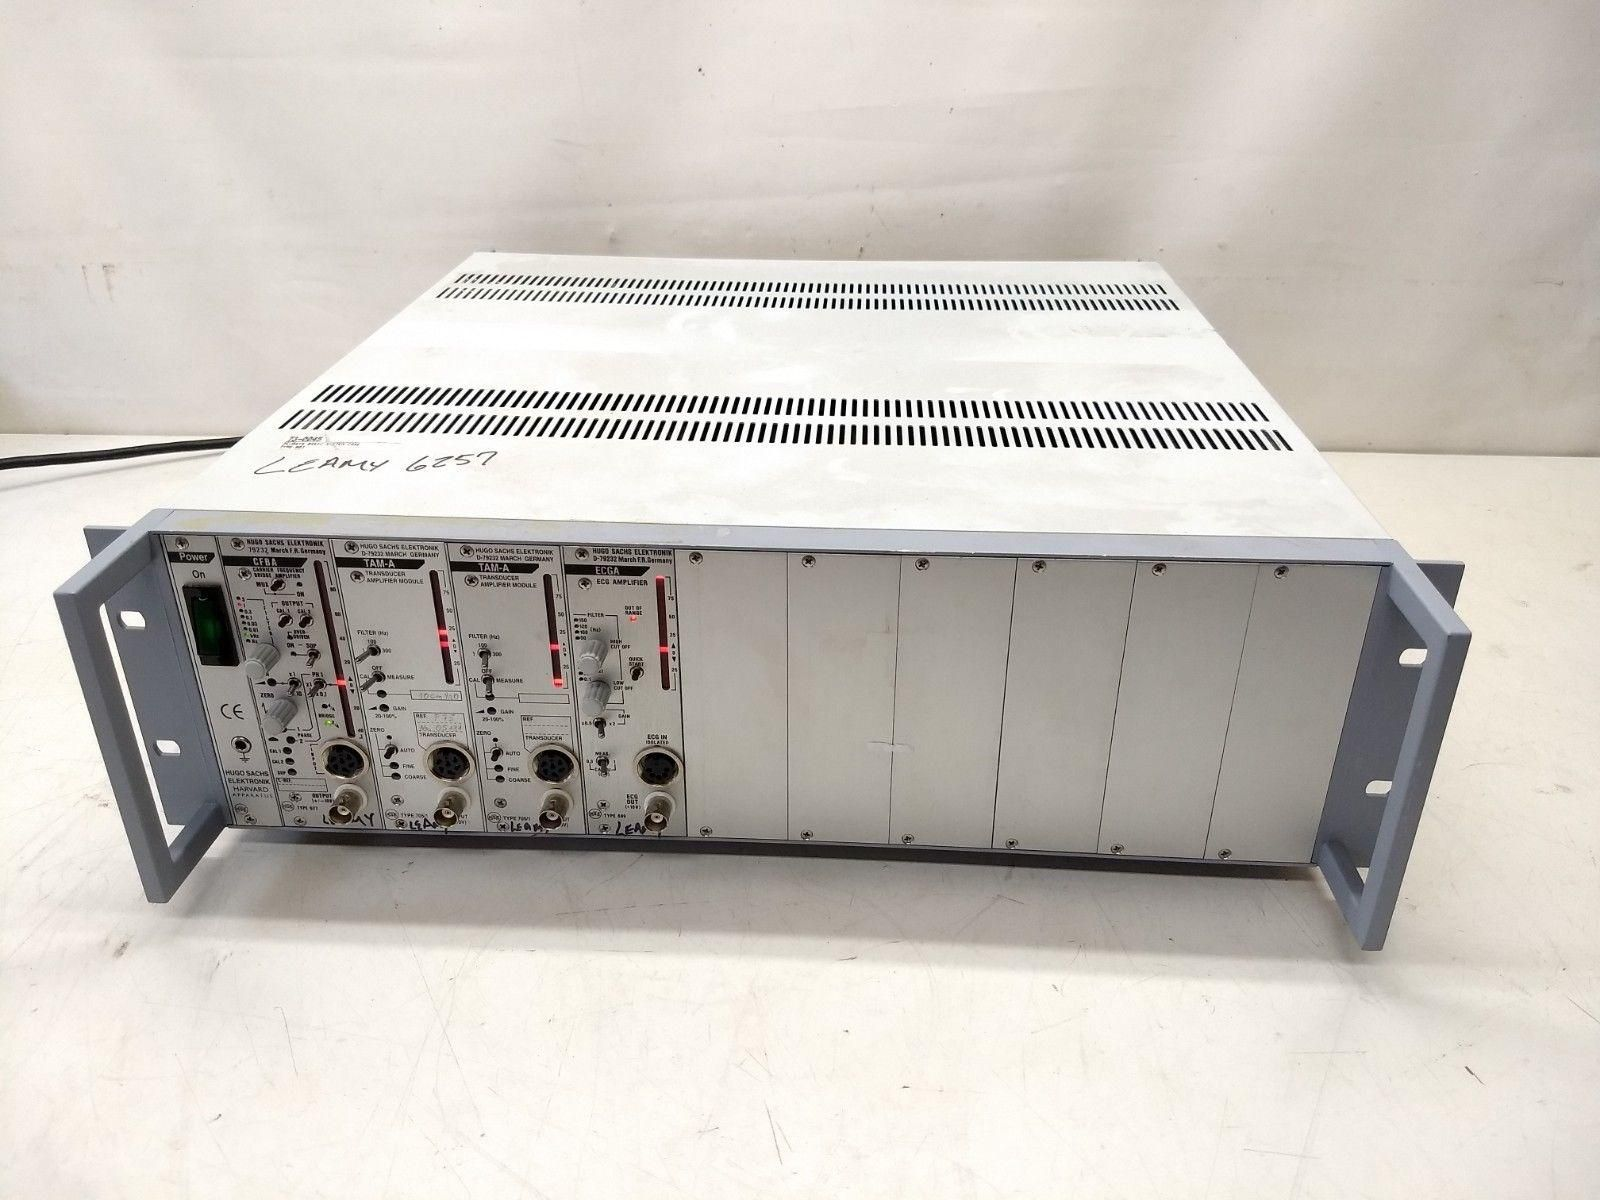 Hugo Sachs Type 603 Plugsys, CFBA Carrier Frequency, ECGA Amplifier, TAM-A